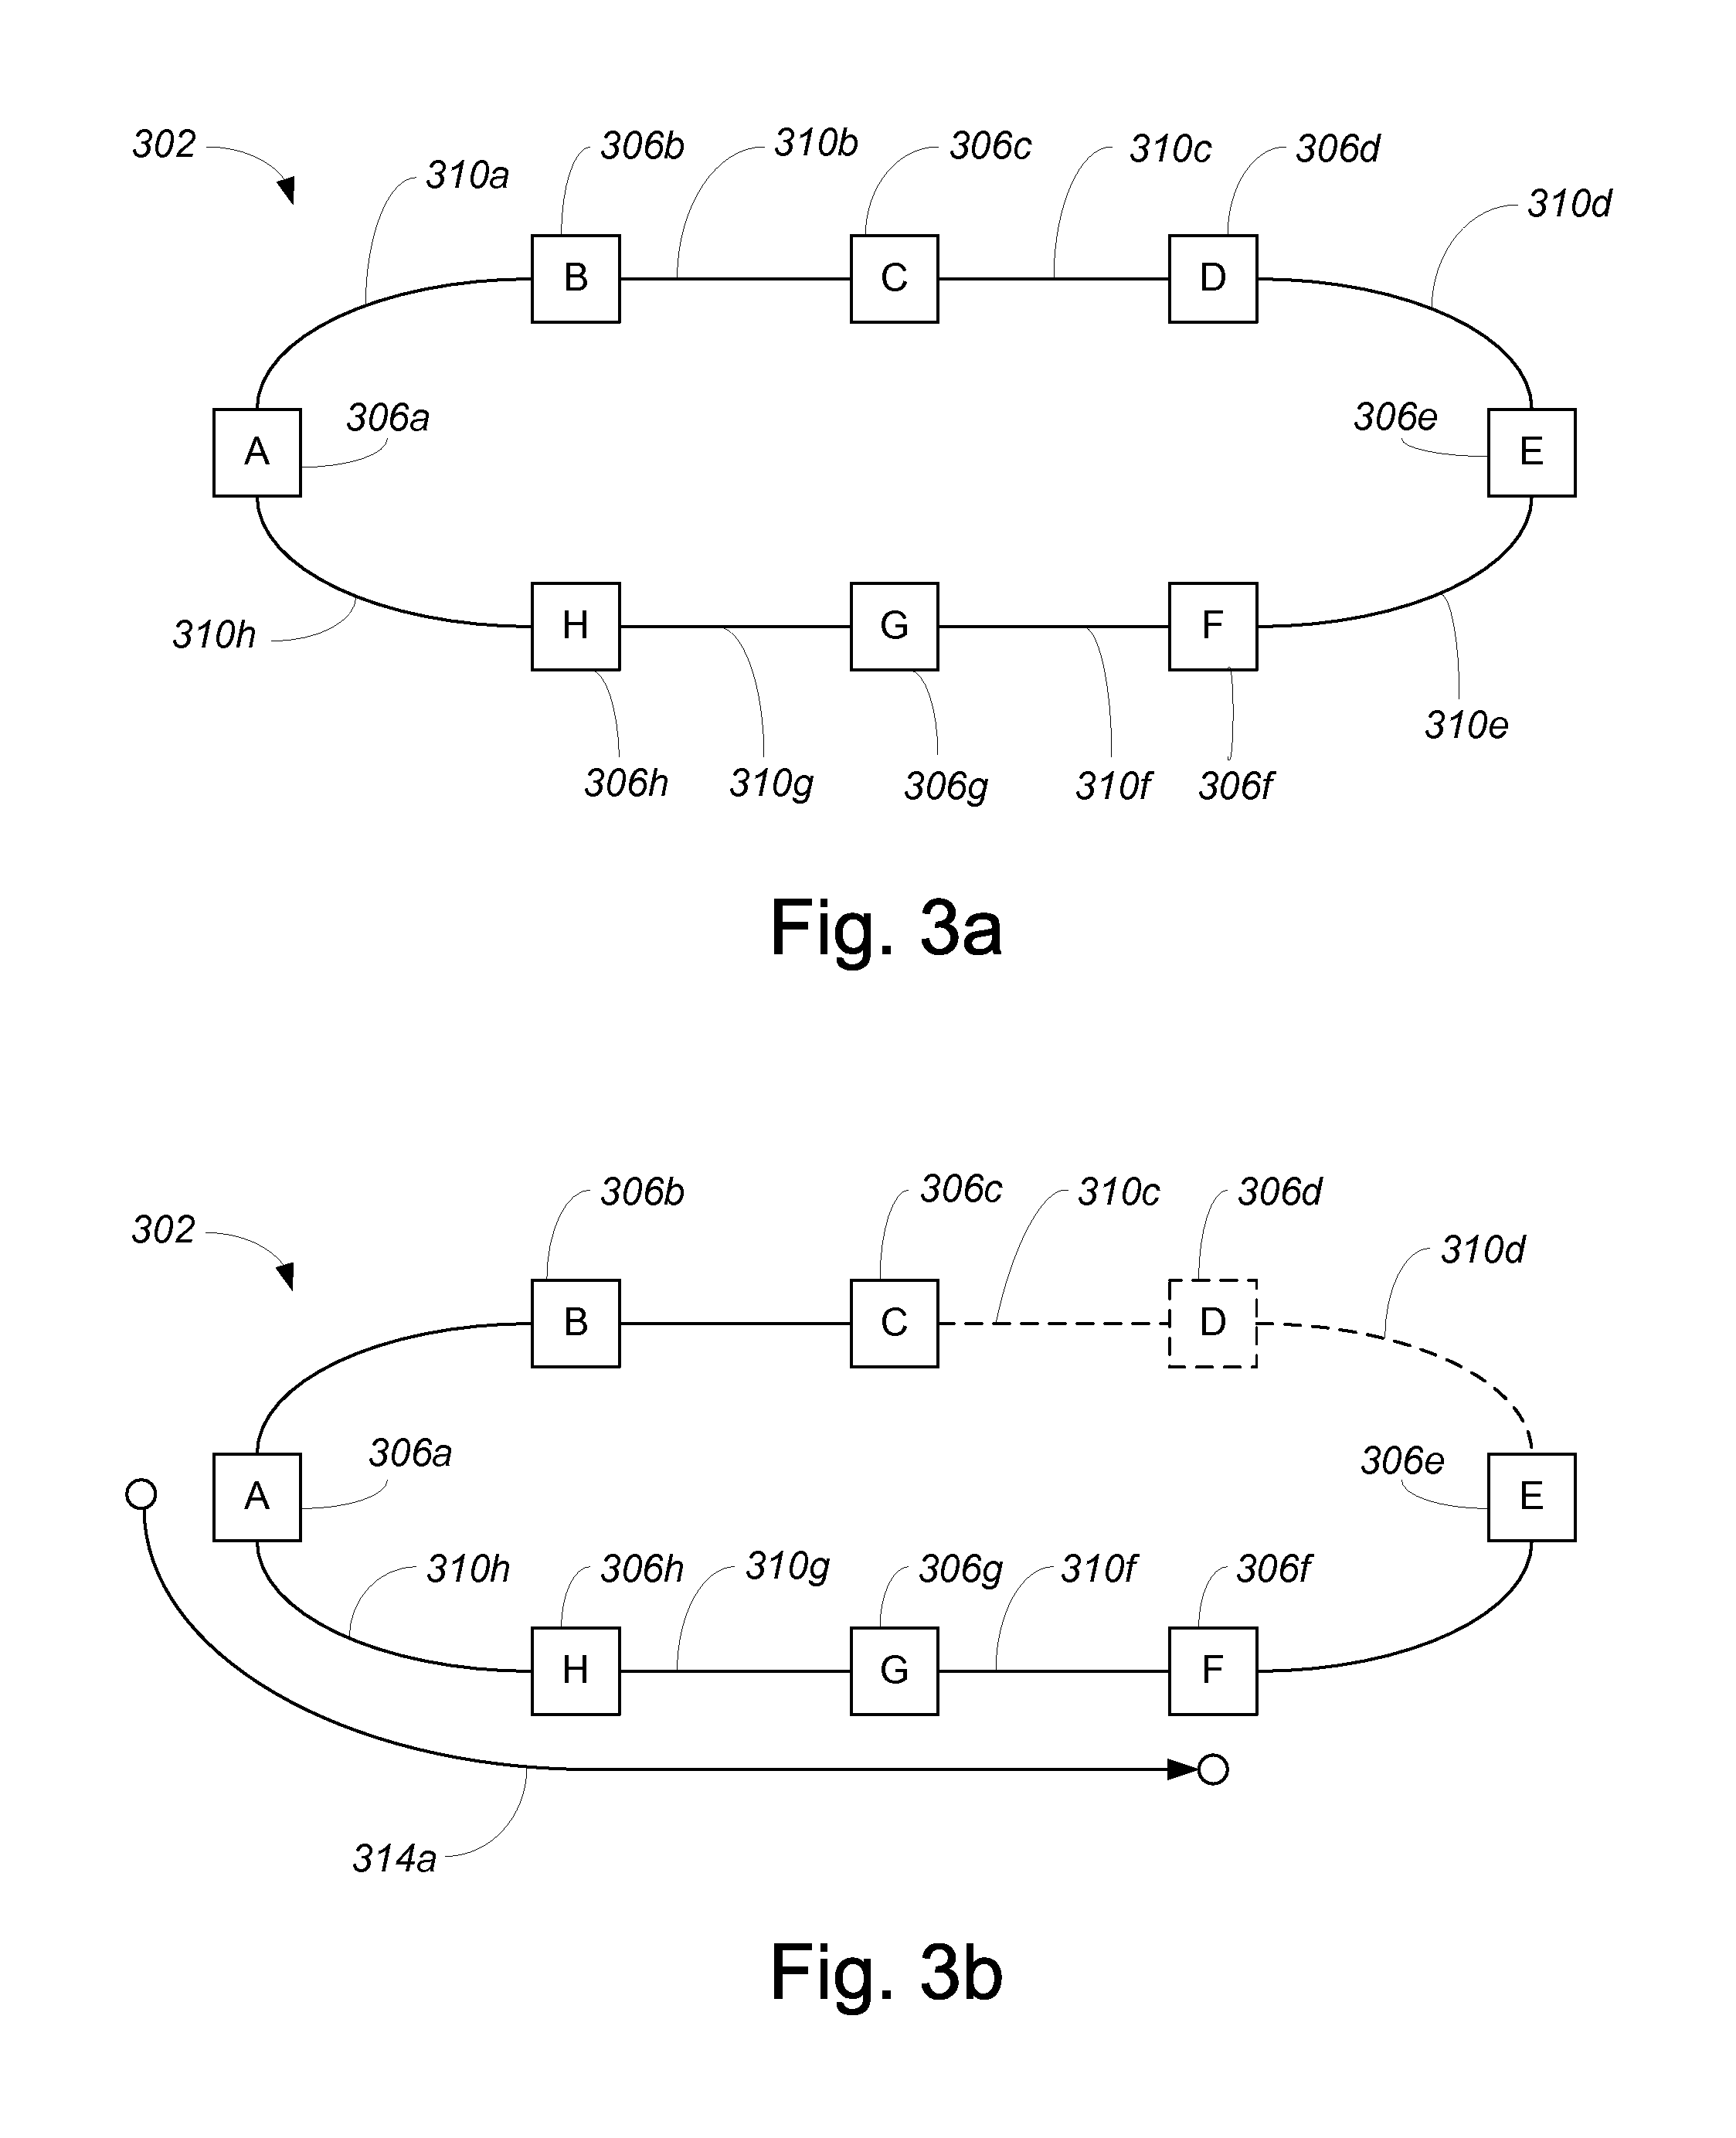 Method and apparatus for computing a path through specified elements in a network